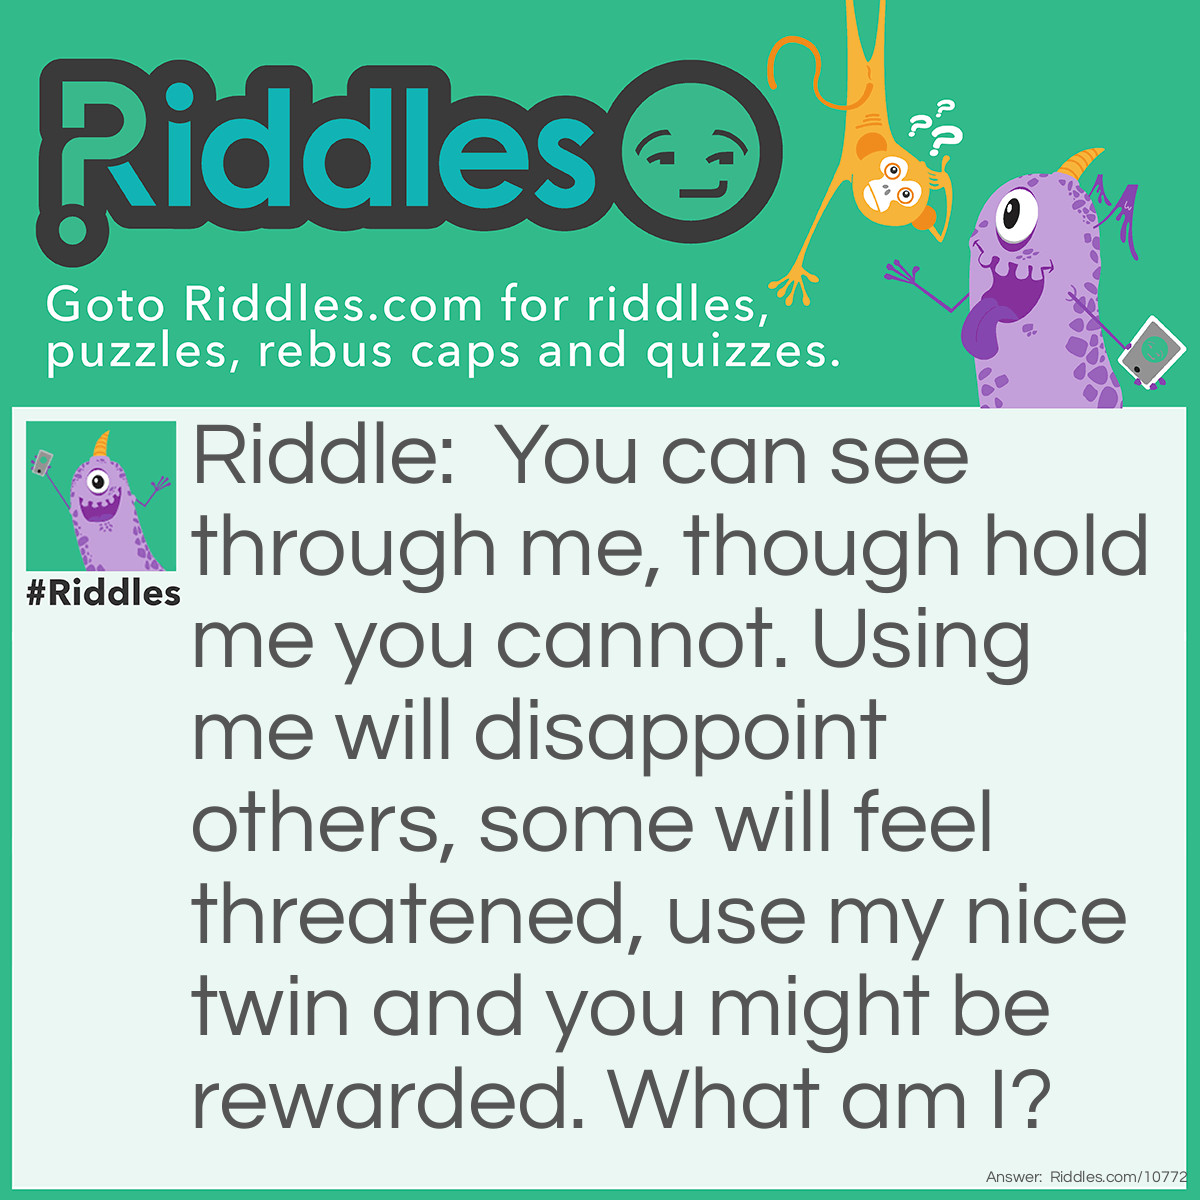 Riddle: You can see through me, though hold me you cannot. Using me will disappoint others, some will feel threatened, use my nice twin and you might be rewarded. What am I? Answer: A lie.